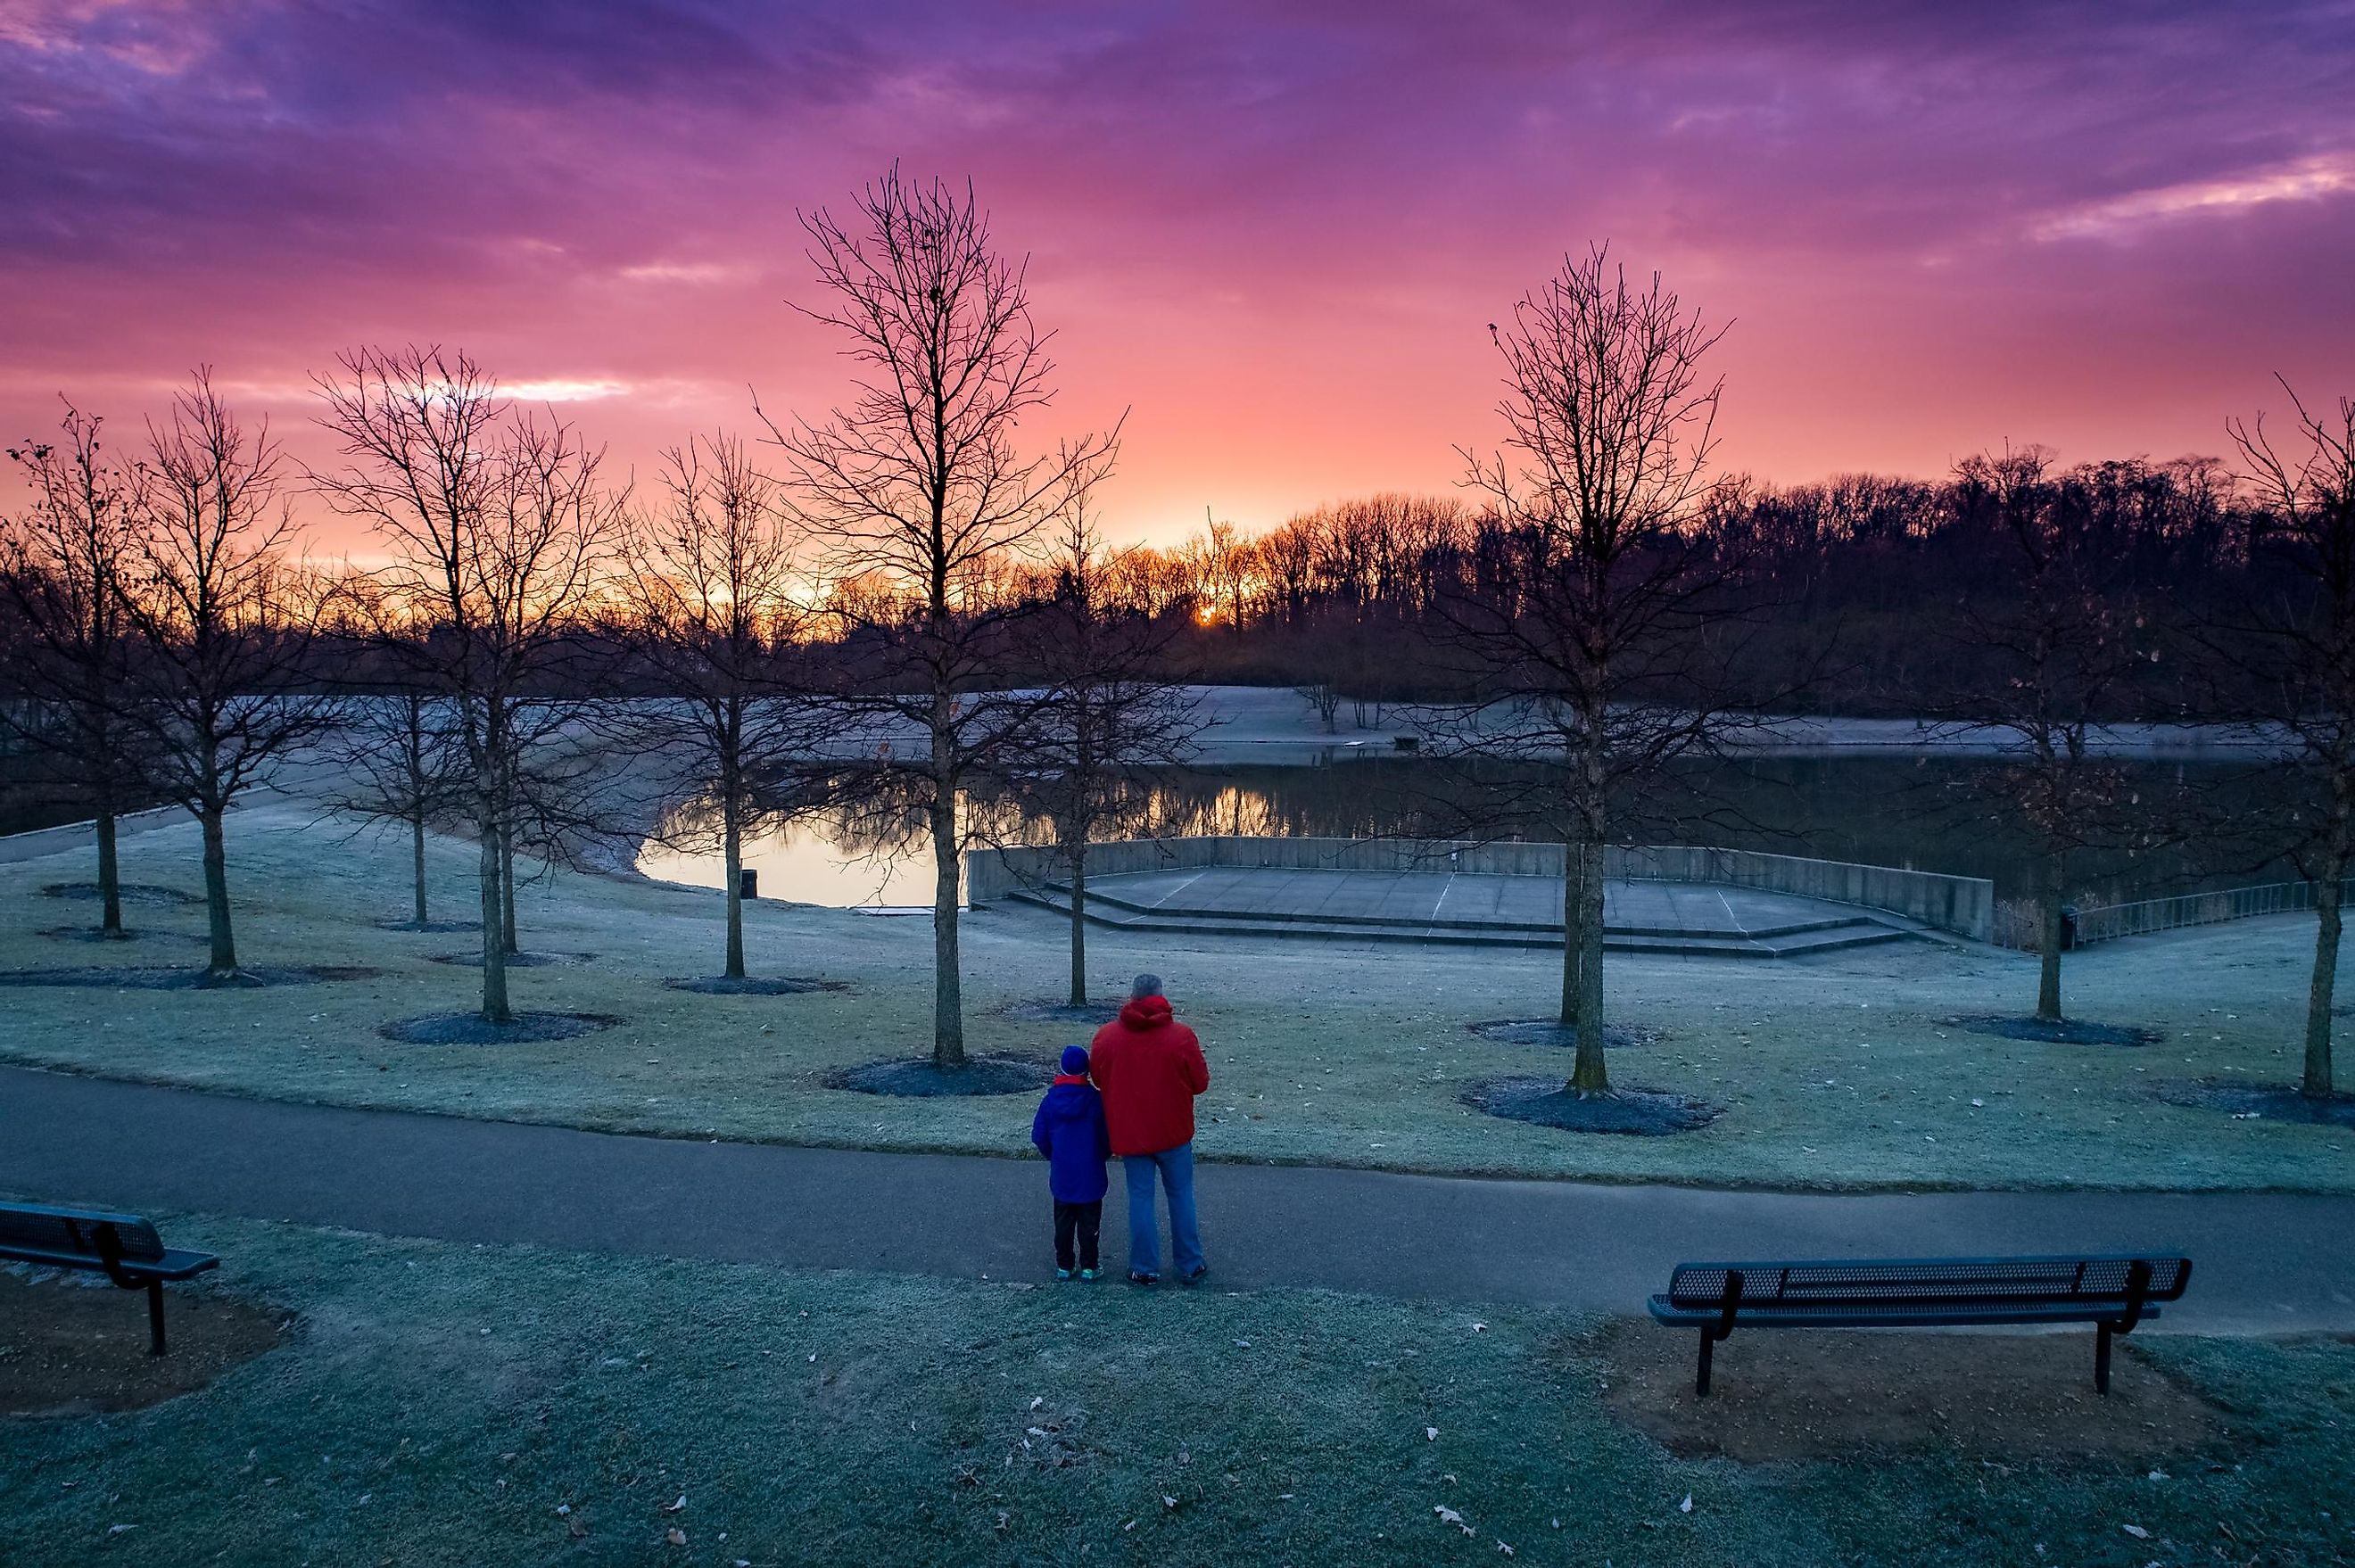 Aerial view from a drone capturing a father and son admiring the sunrise over the trees and lake at the park in Beavercreek, Ohio.